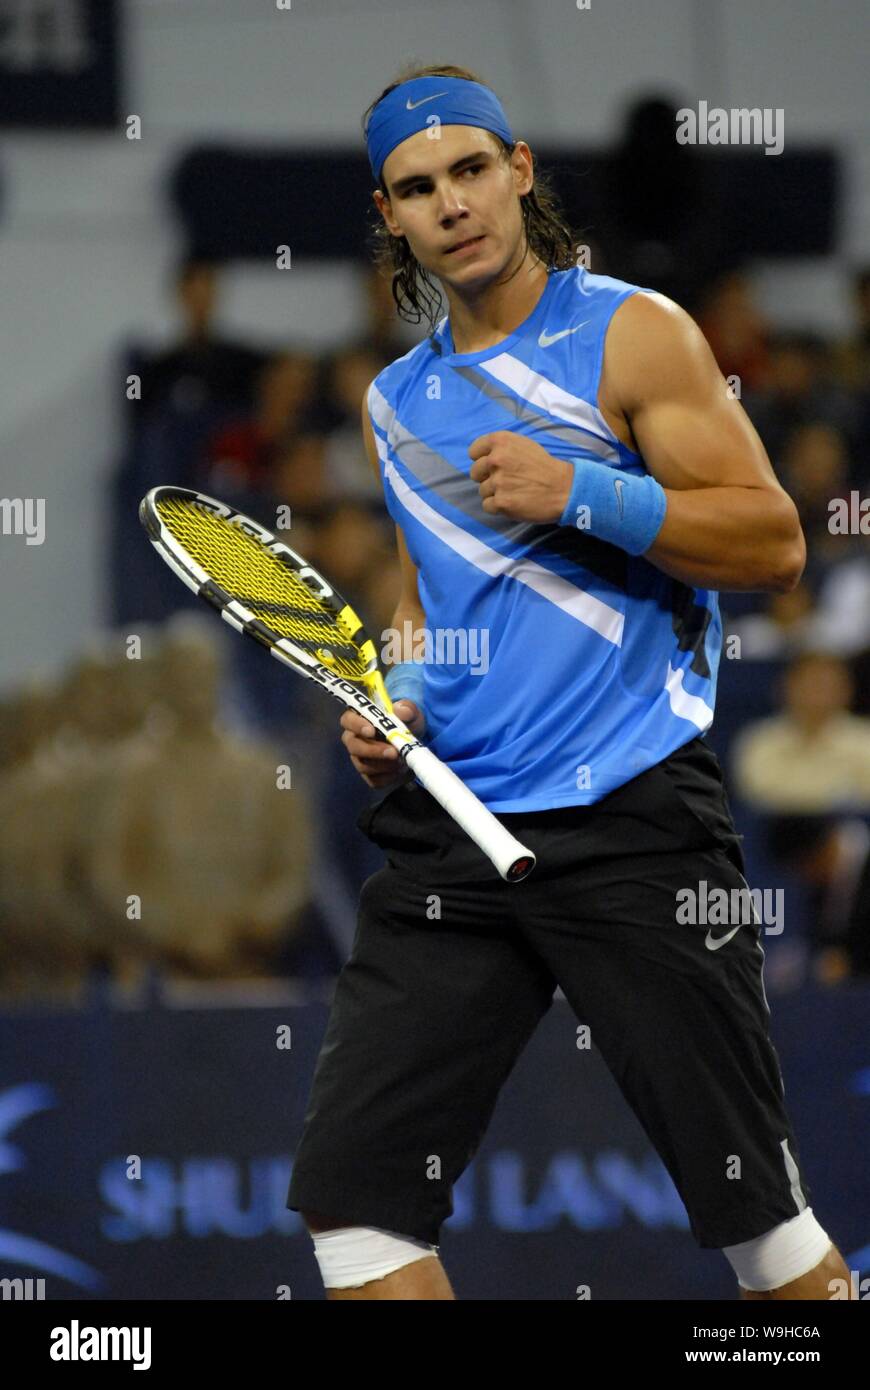 Rafael Nadal of Spain competes against Richard Gasquet of France during a  match of Tennis Masters Cup in Shanghai 11 November 2007. Rafael Nadal  defea Stock Photo - Alamy